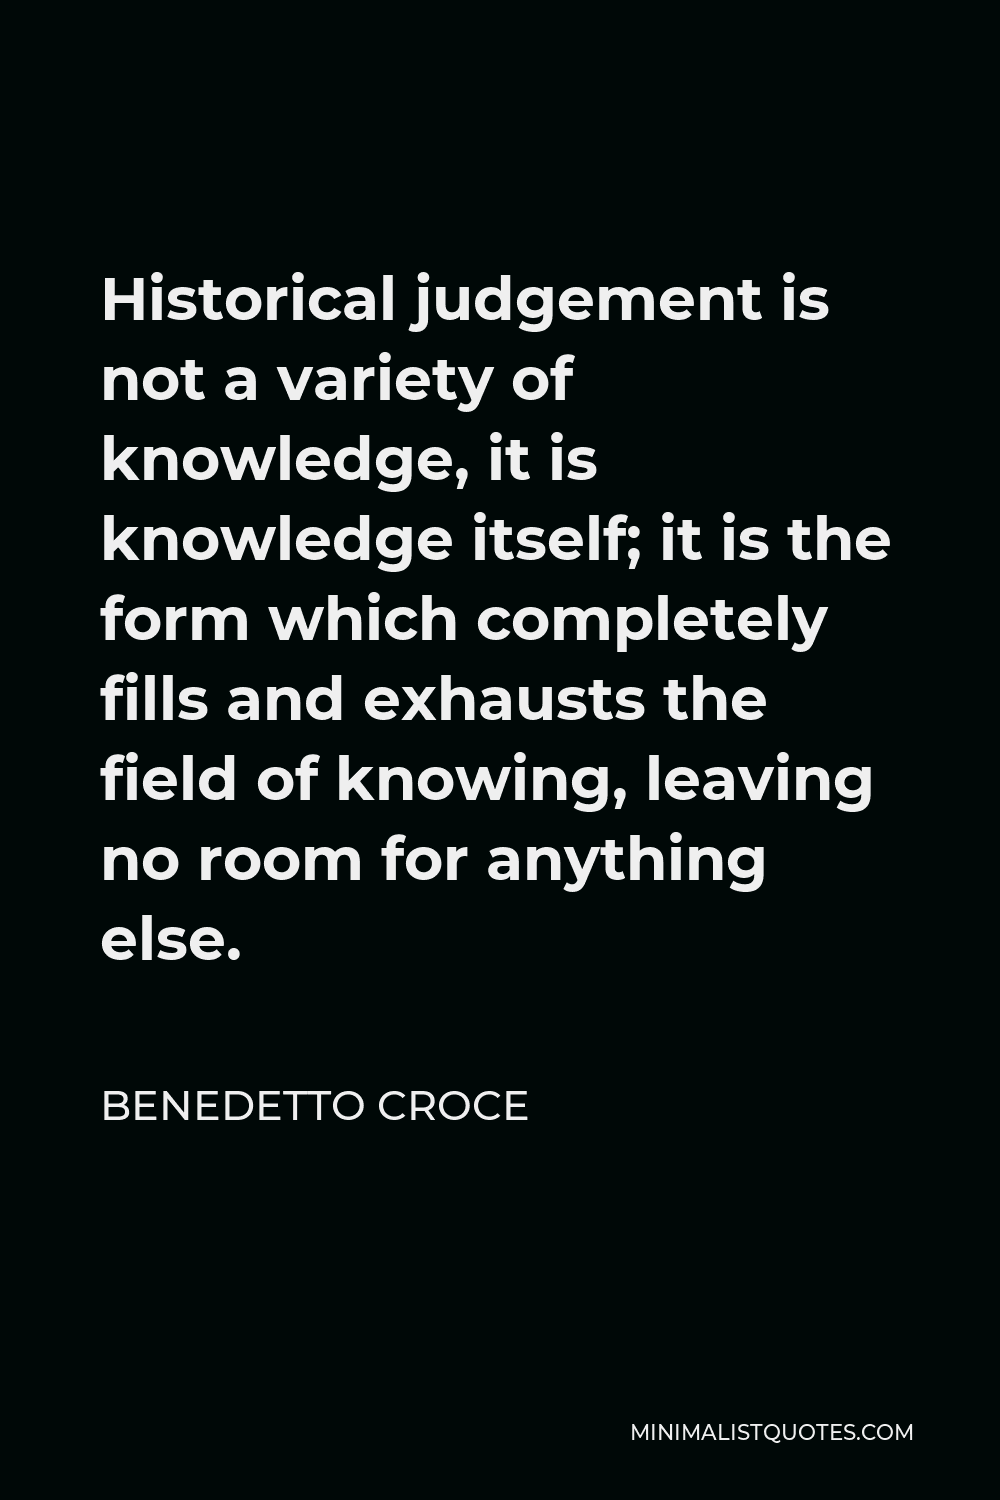 Benedetto Croce Quote - Historical judgement is not a variety of knowledge, it is knowledge itself; it is the form which completely fills and exhausts the field of knowing, leaving no room for anything else.